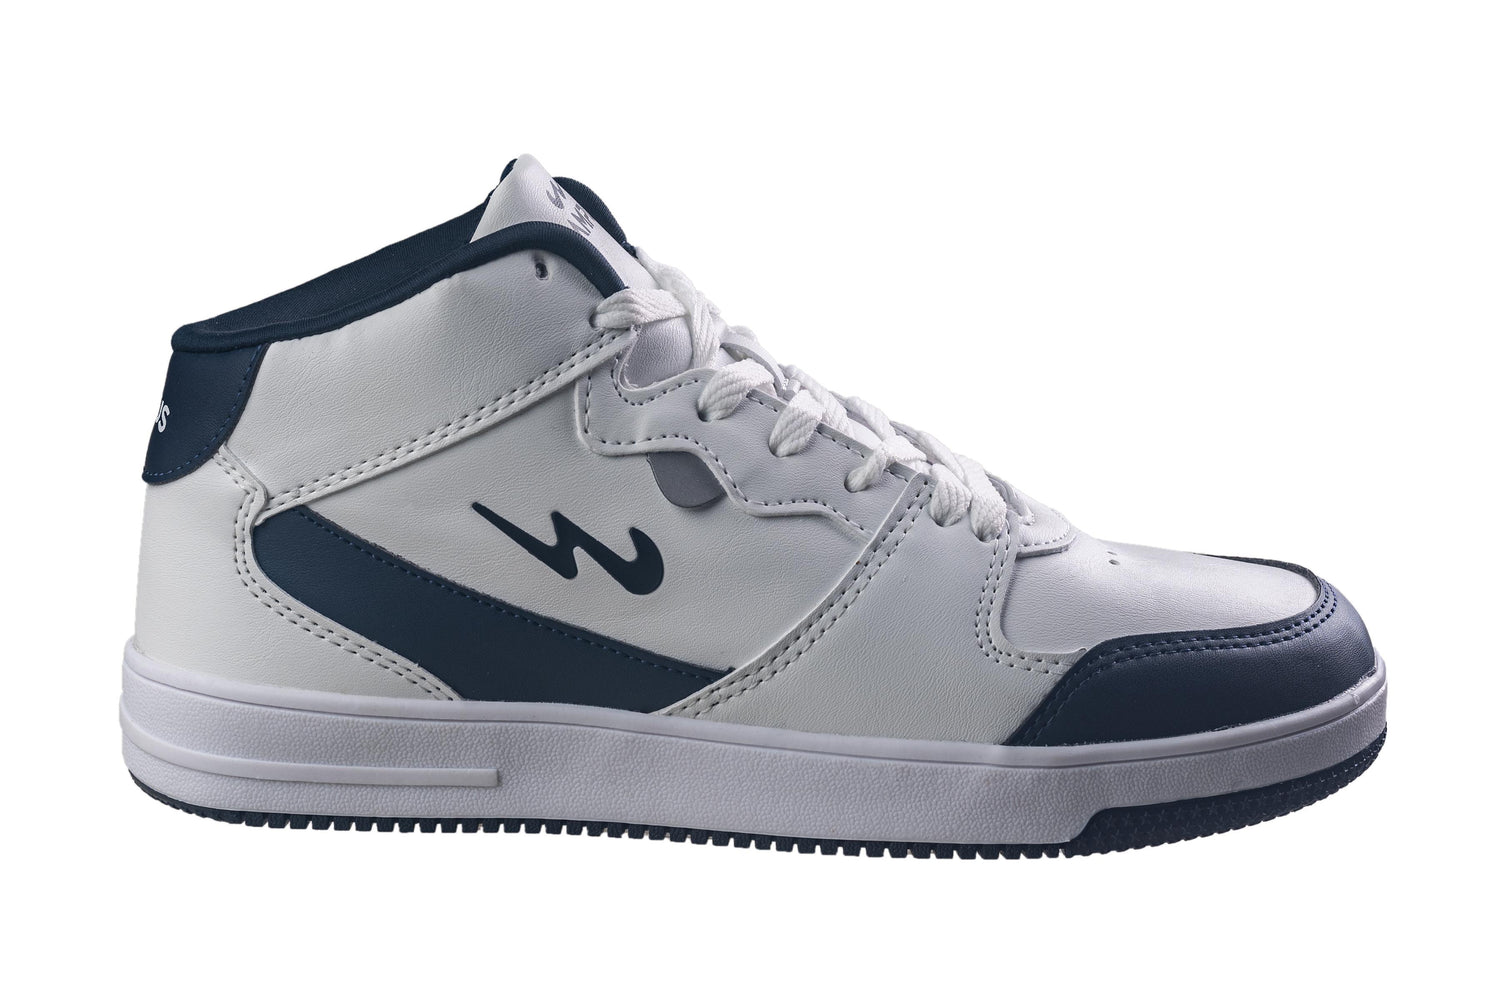 Campus White / Navy Gents Sports Shoe